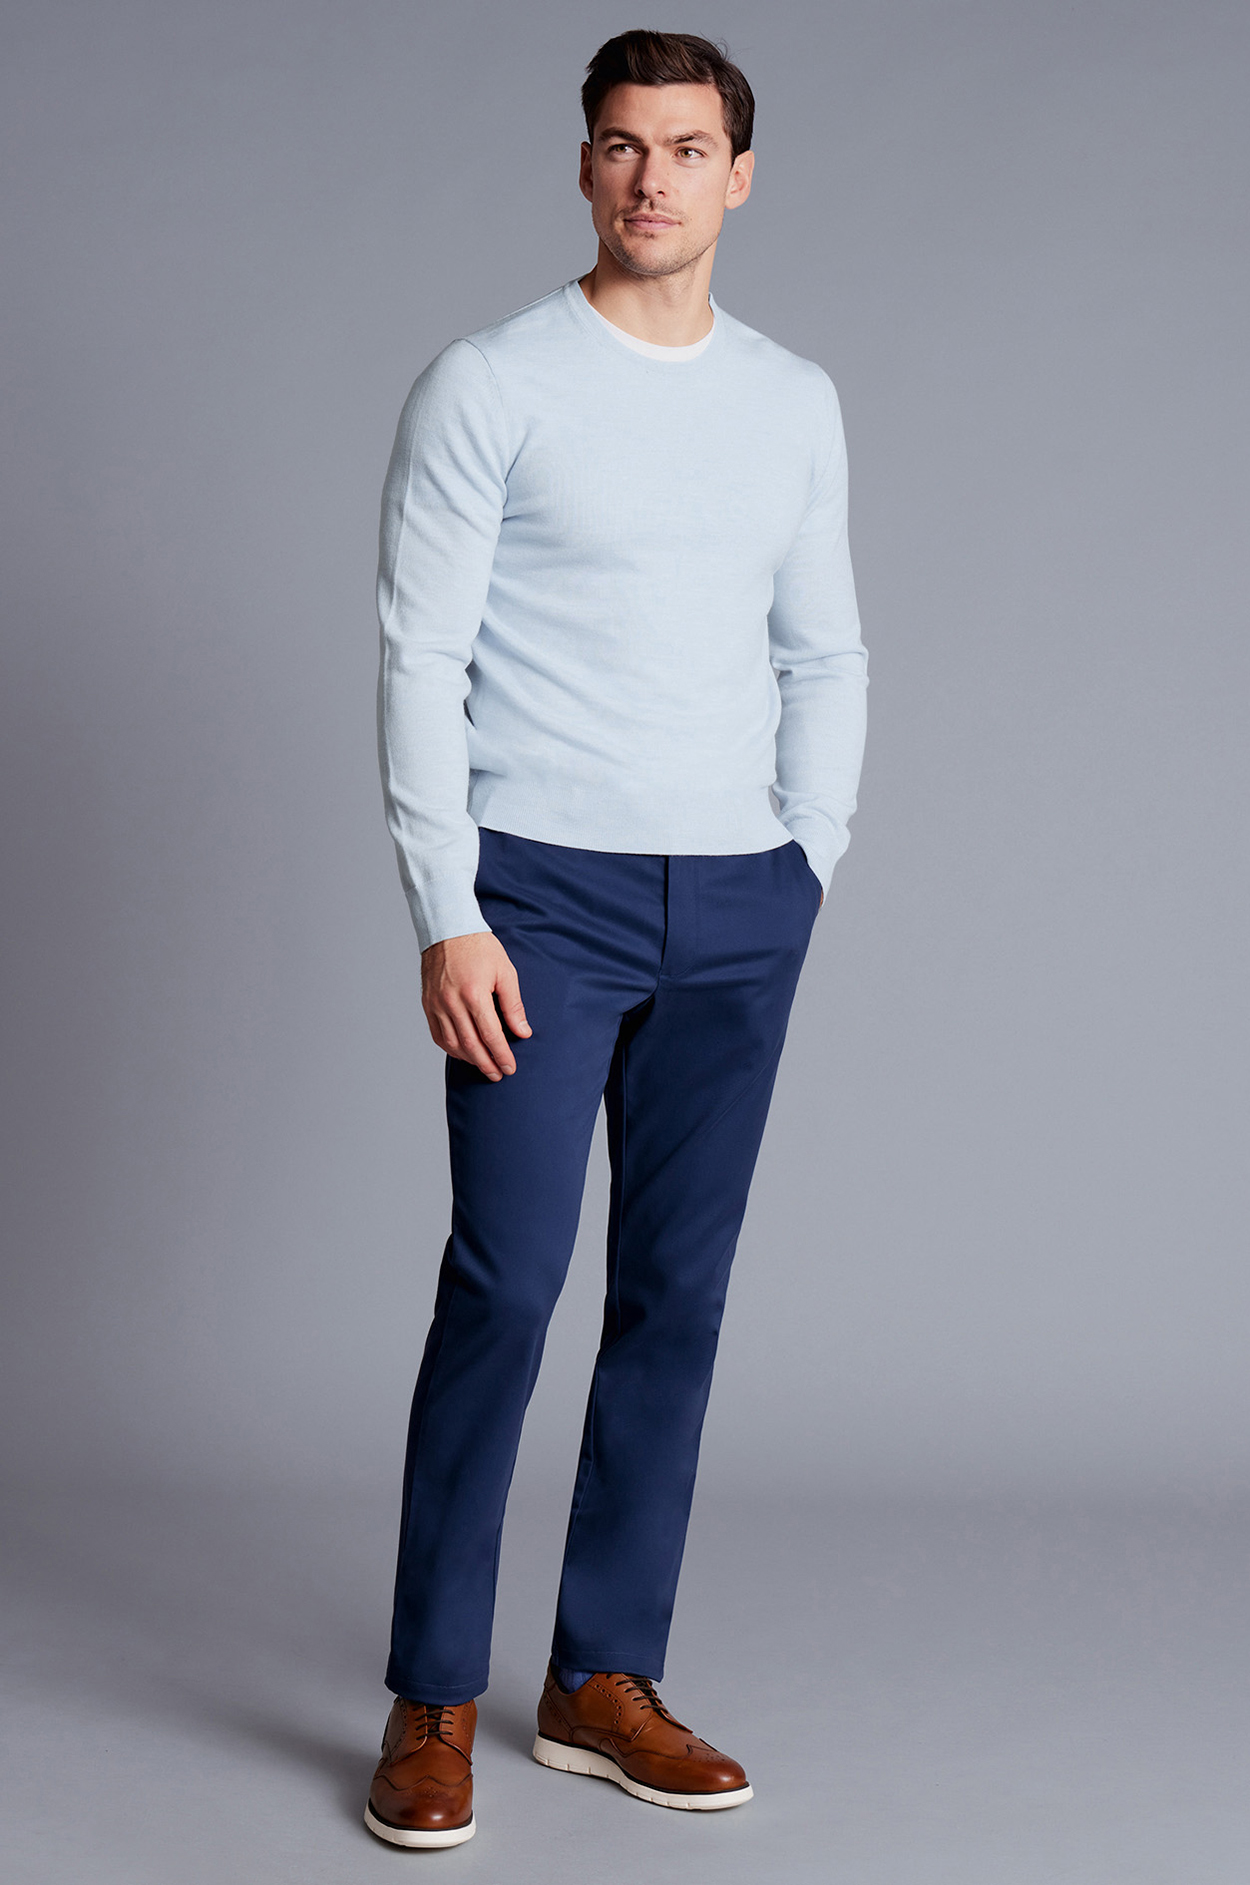 Light blue crew neck shirt, navy pants, and brown shoes outfit